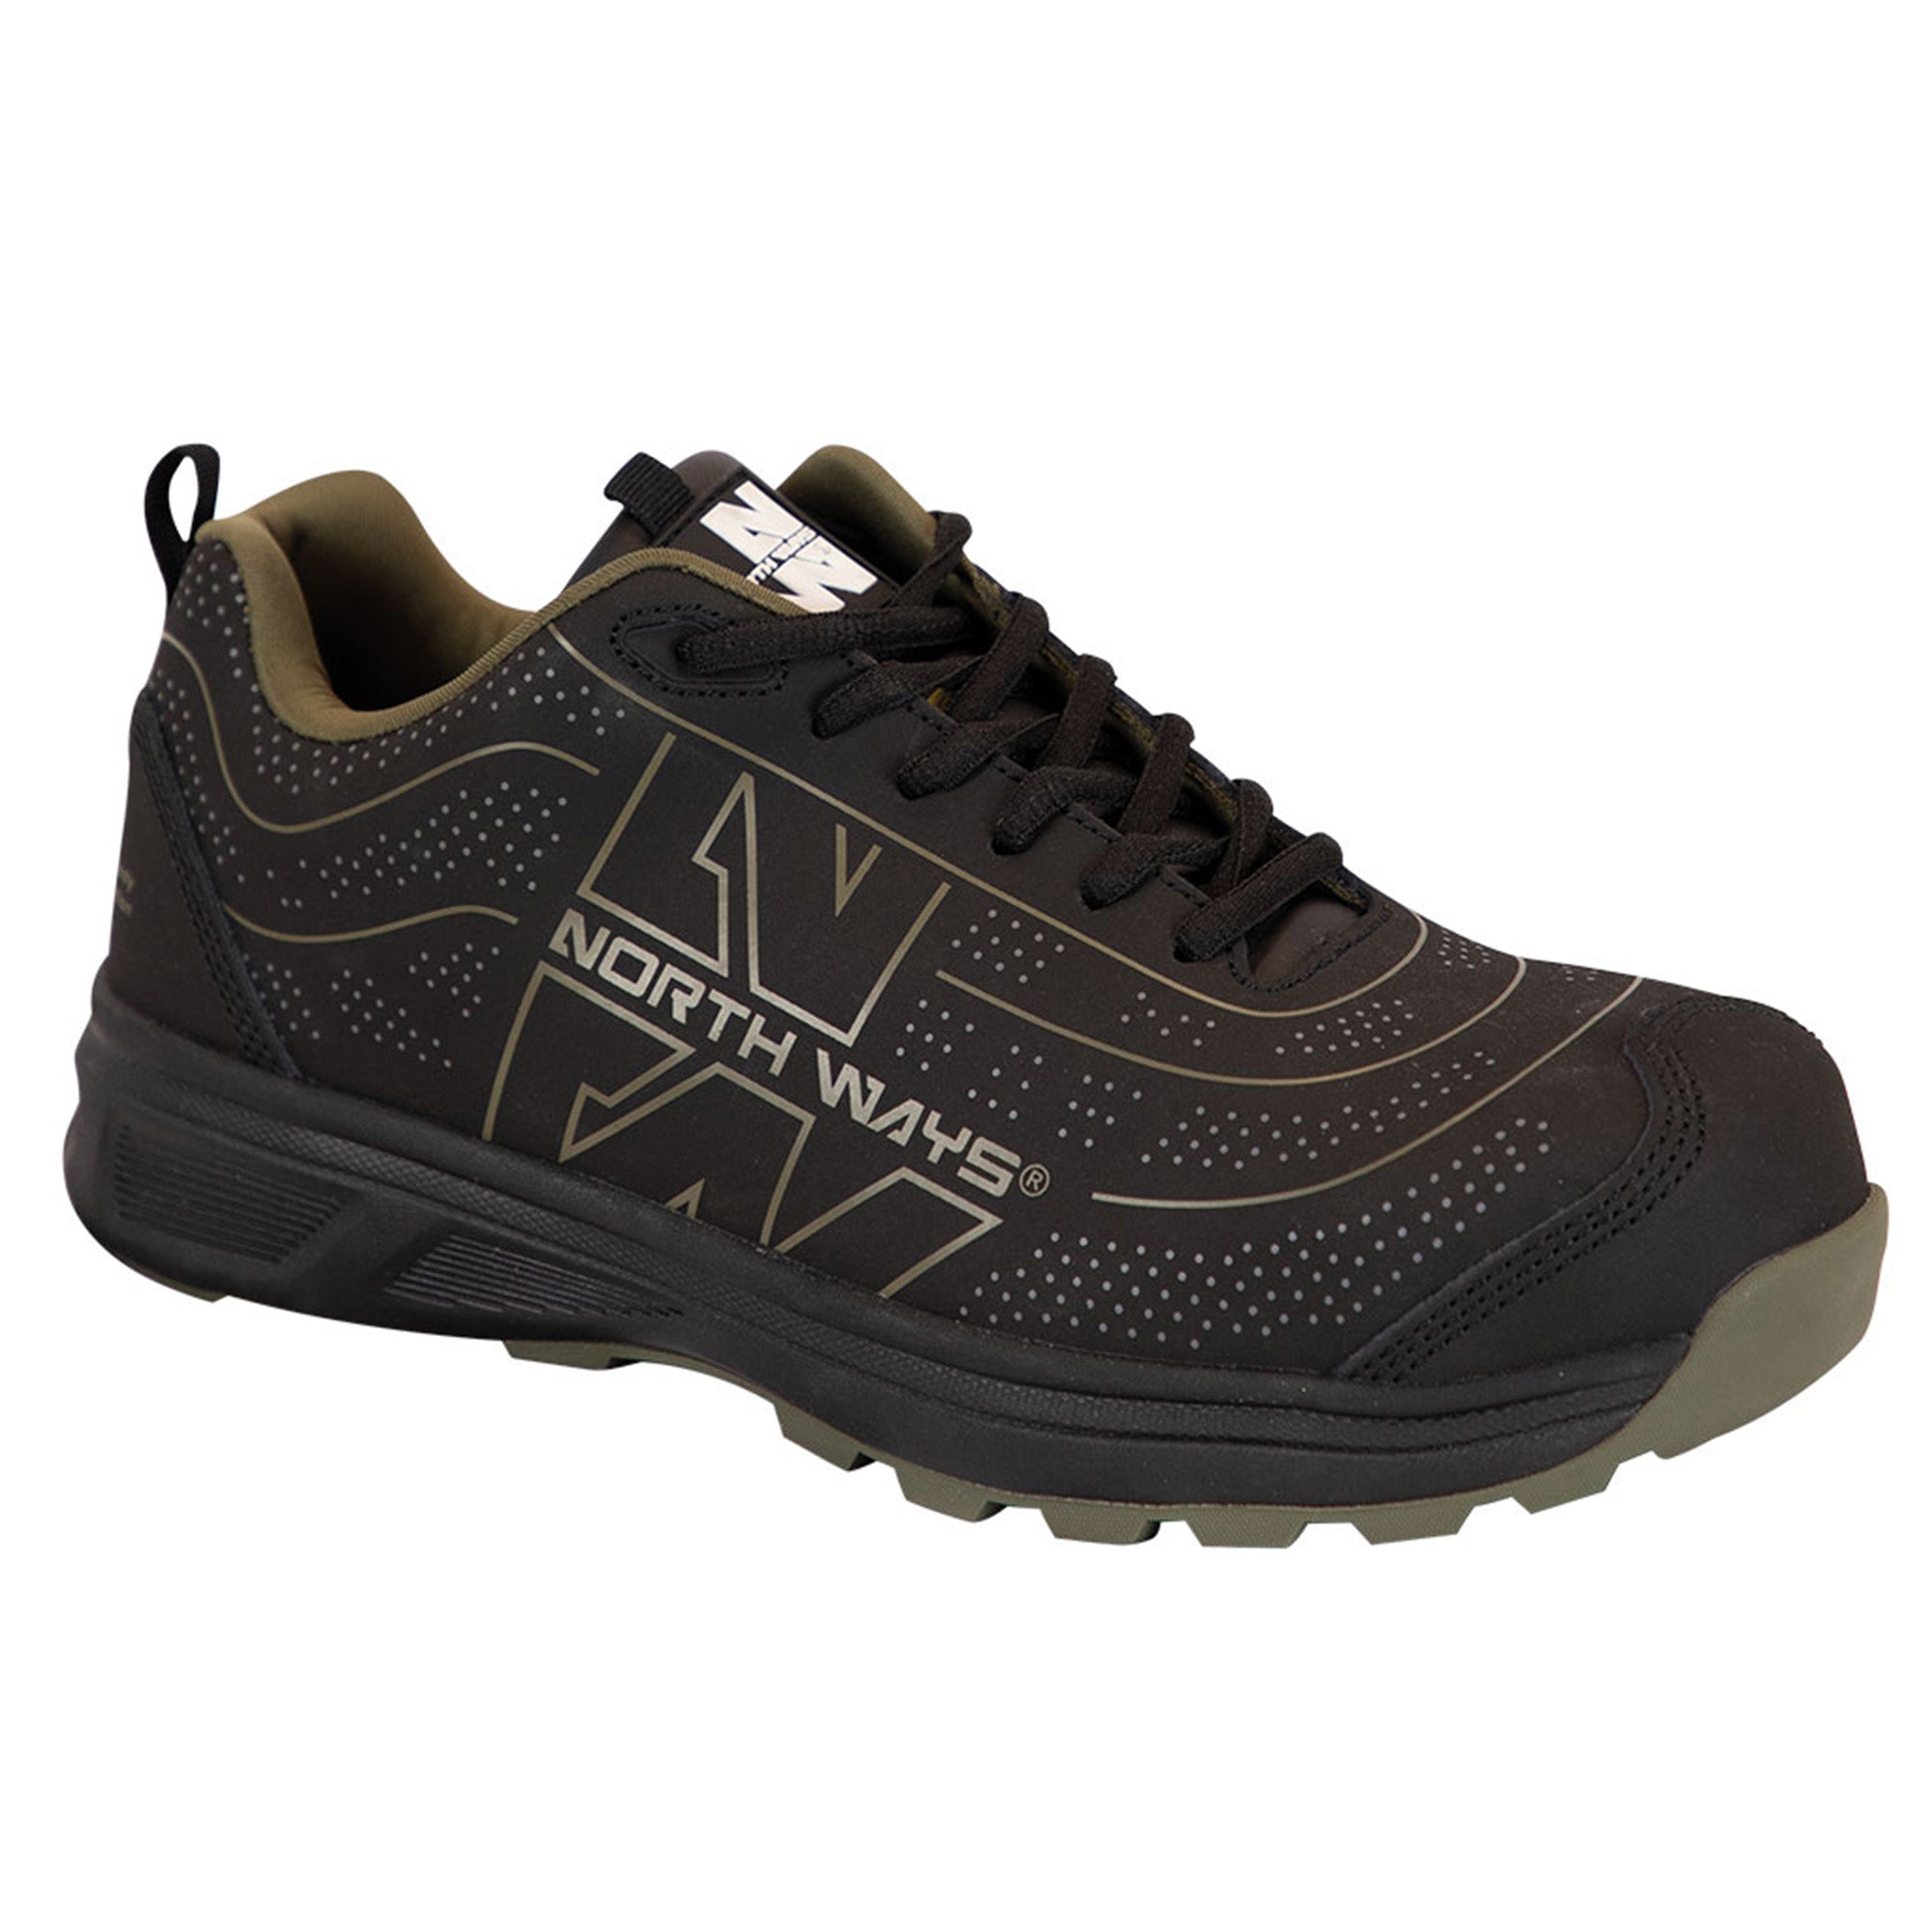 SPILL - LOW SAFETY SHOES - 7045 | Black / Khaki